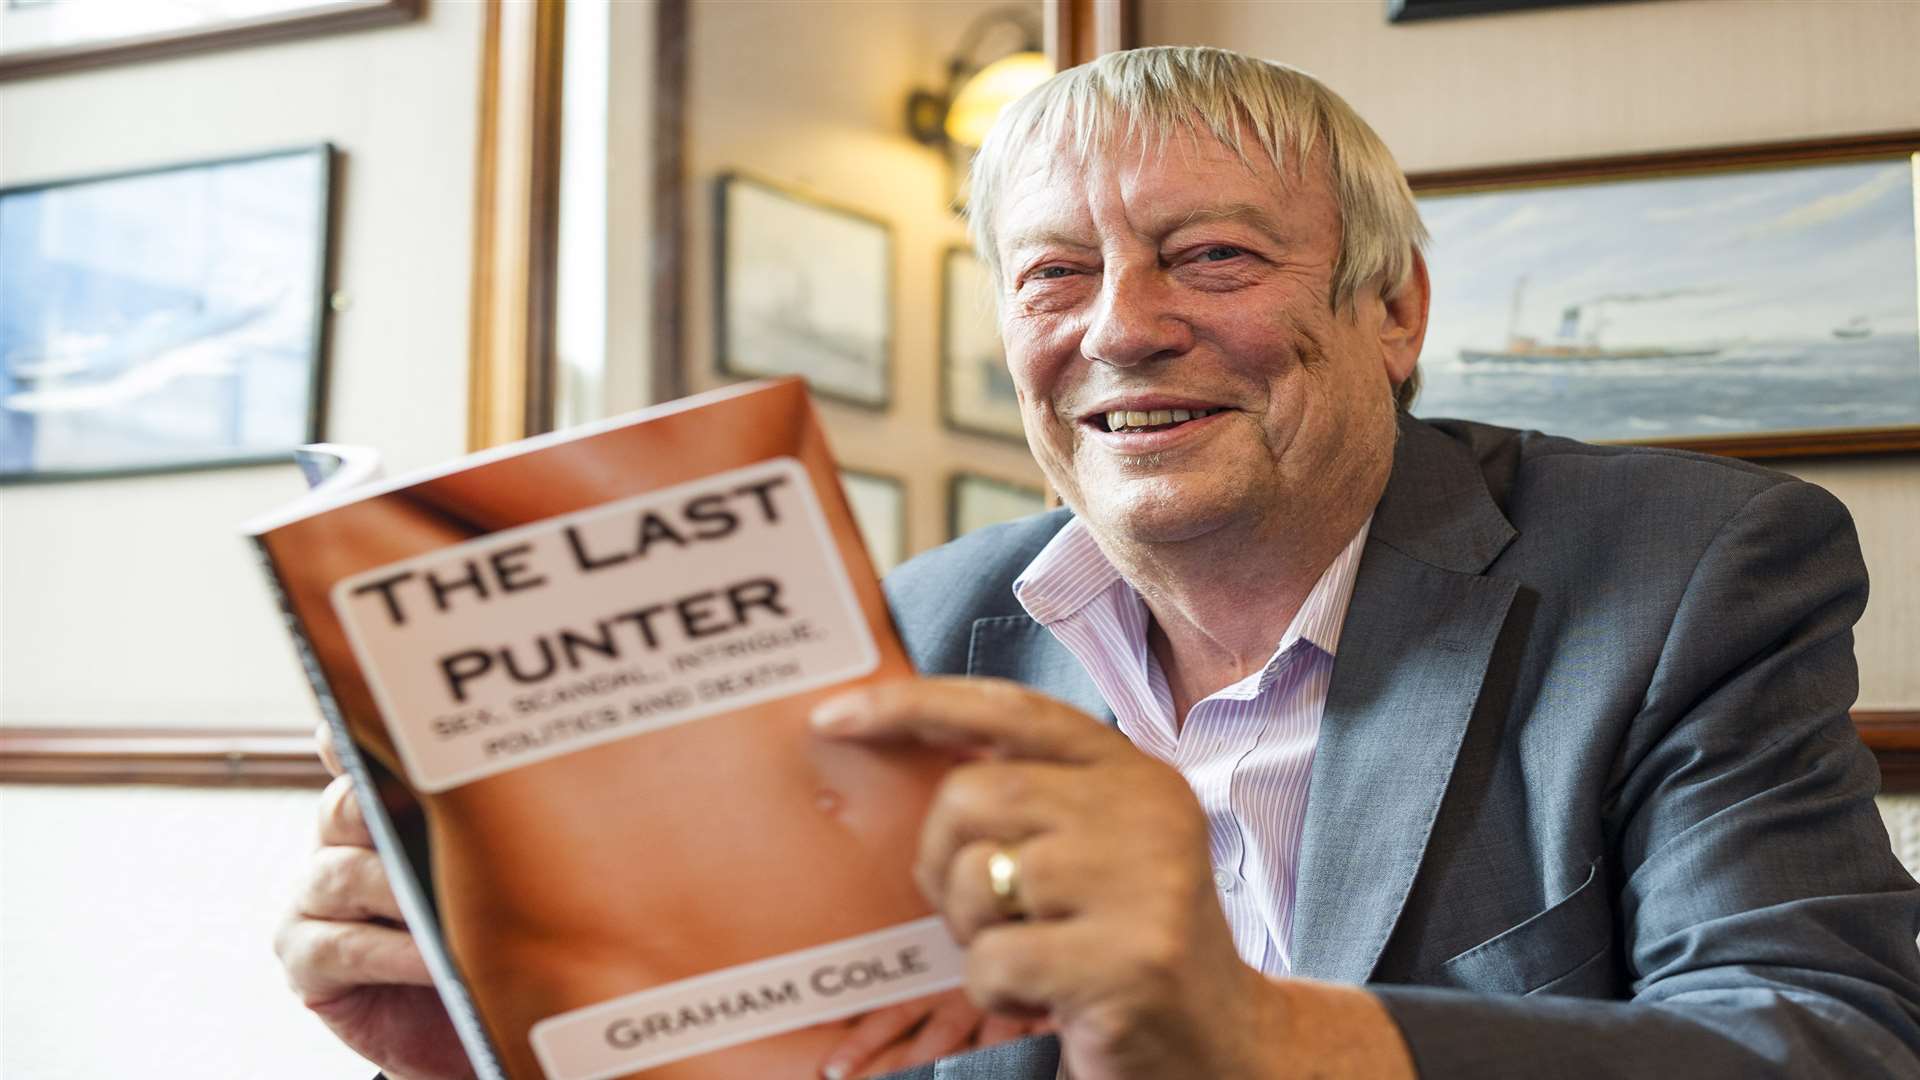 Graham Cole with his book